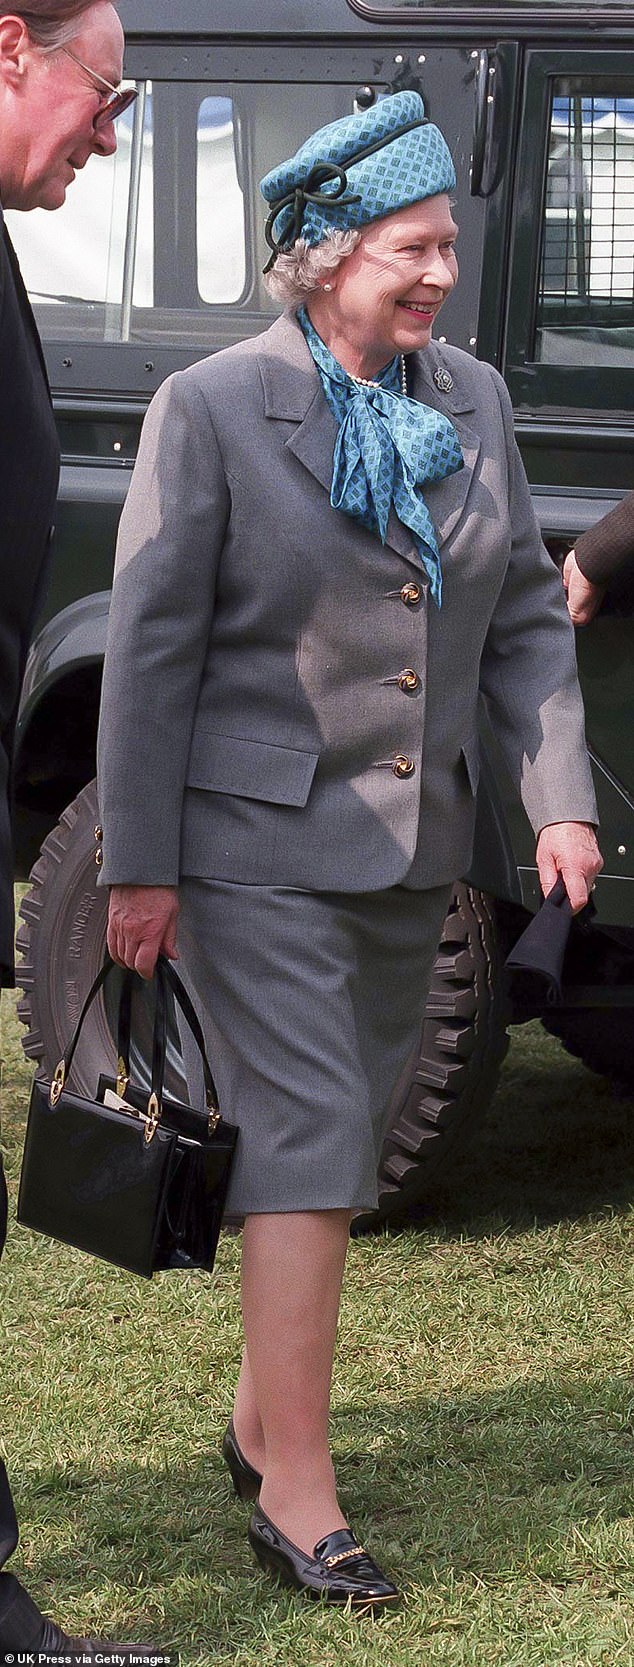 Elizabeth is pictured wearing the brooch, believed to have originally belonged to Queen Mary of Teck, in 1997.